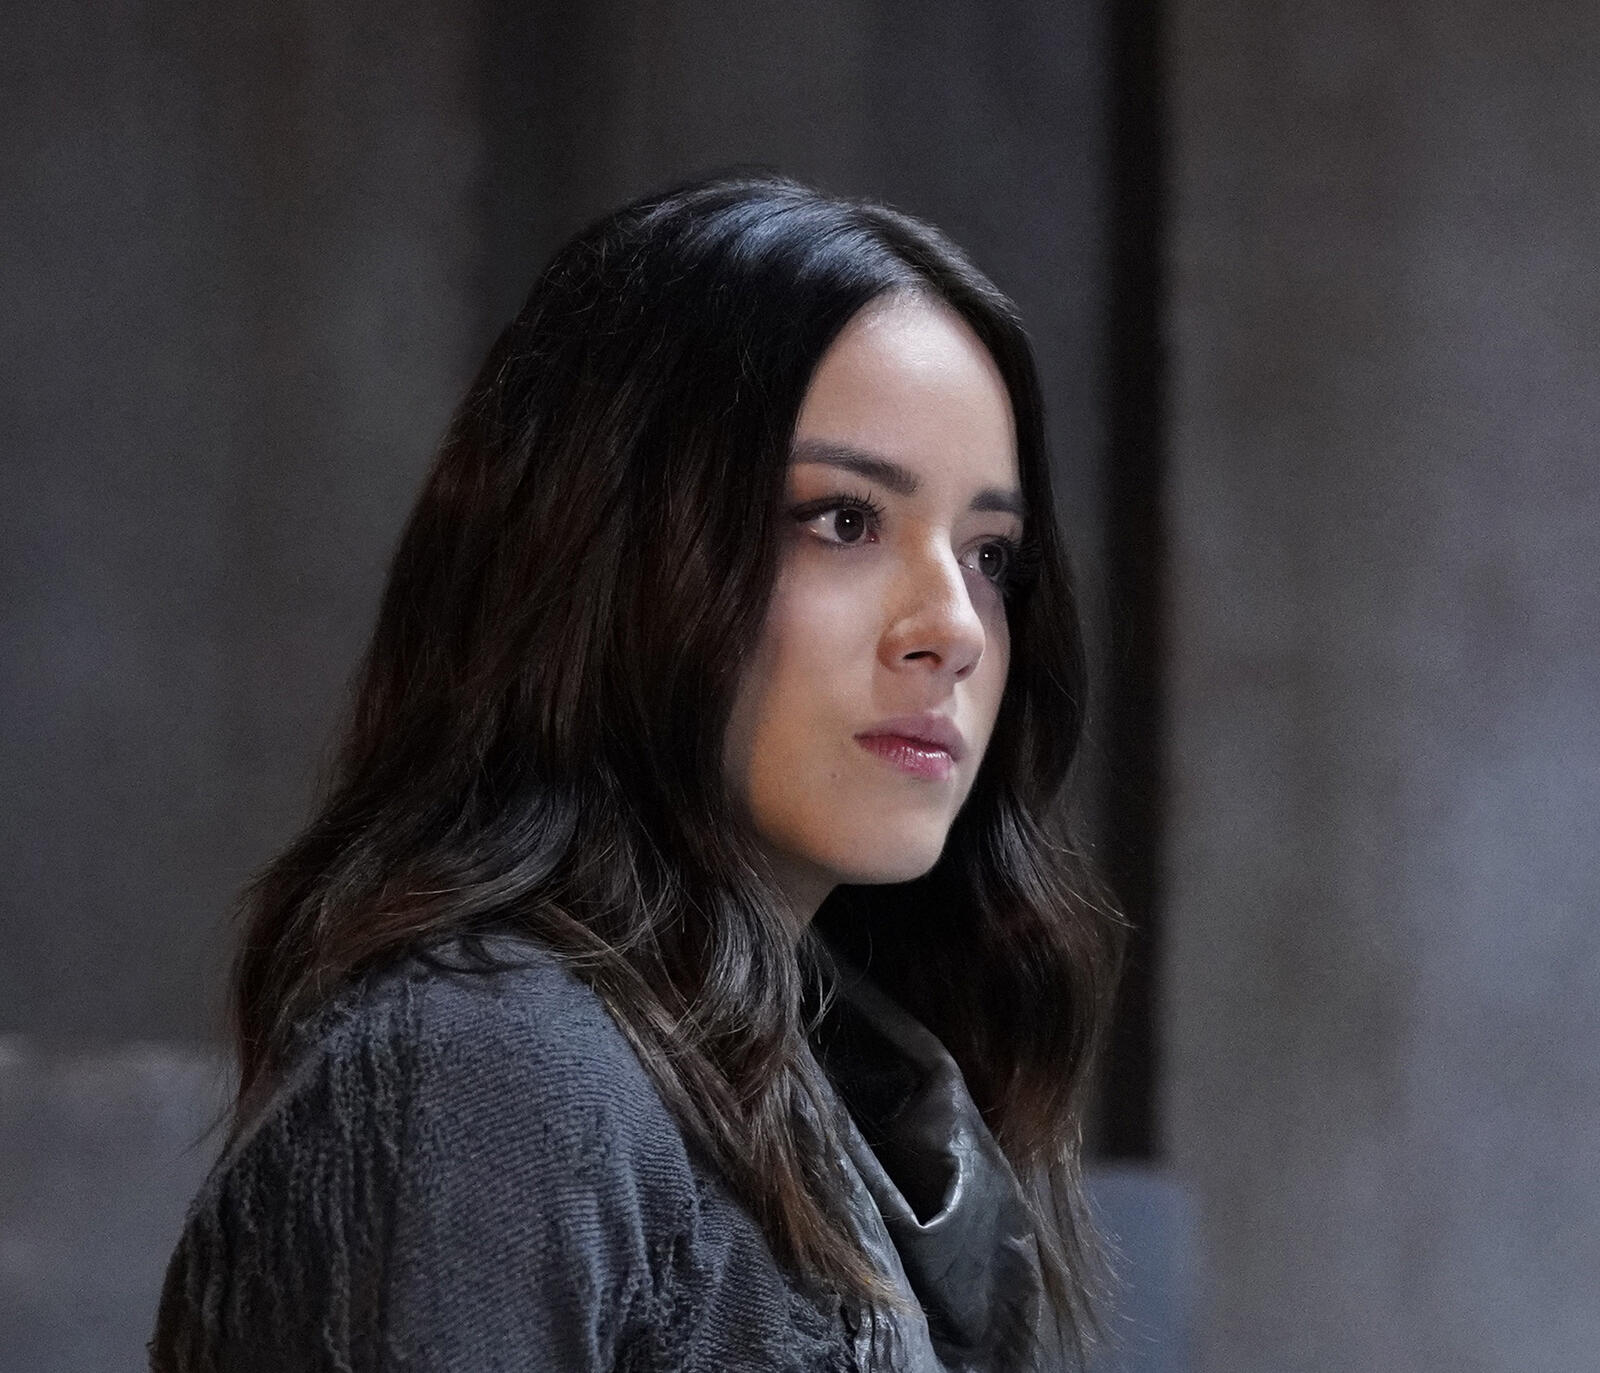 Wallpapers chloe bennet TV show movies on the desktop